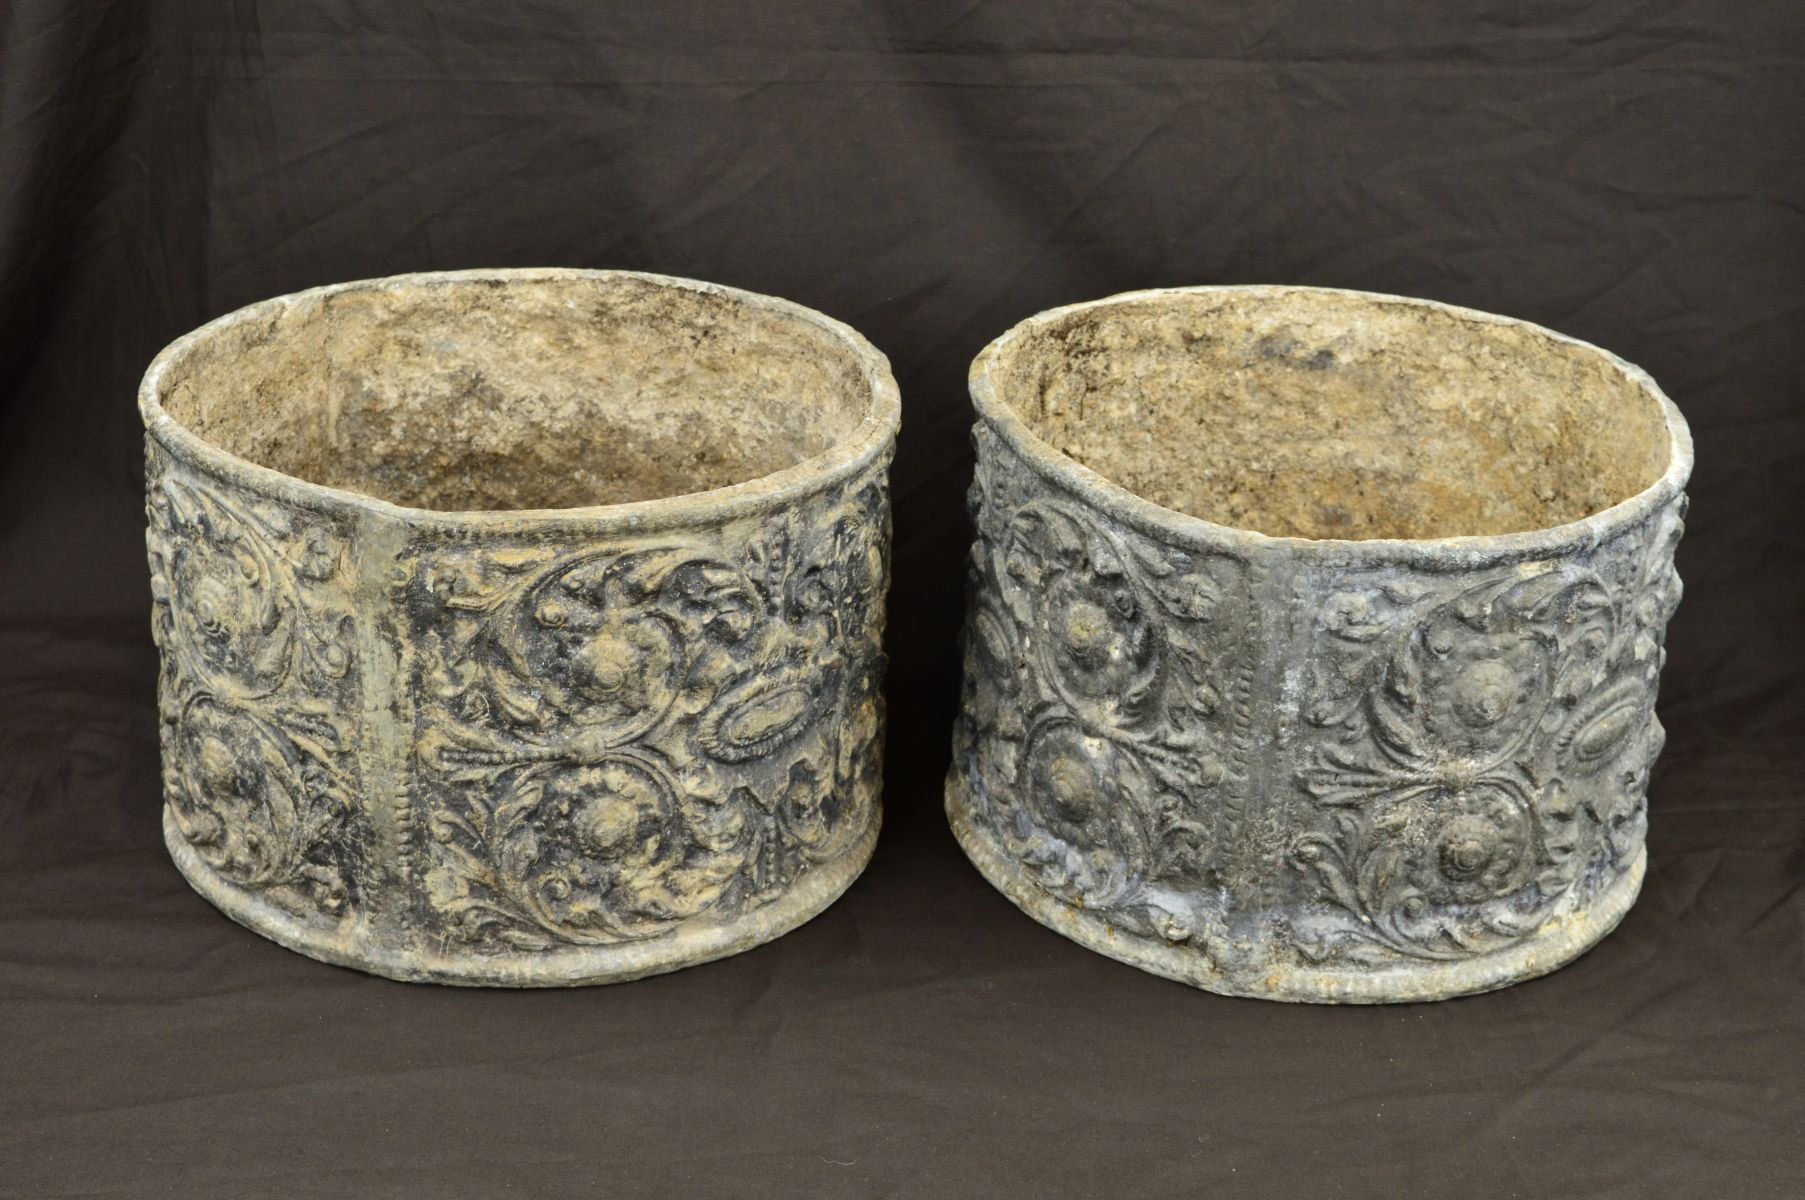 A PAIR OF CIRCULAR LEAD PLANTERS, the exteriors cast with foliate scrolls, flower heads and